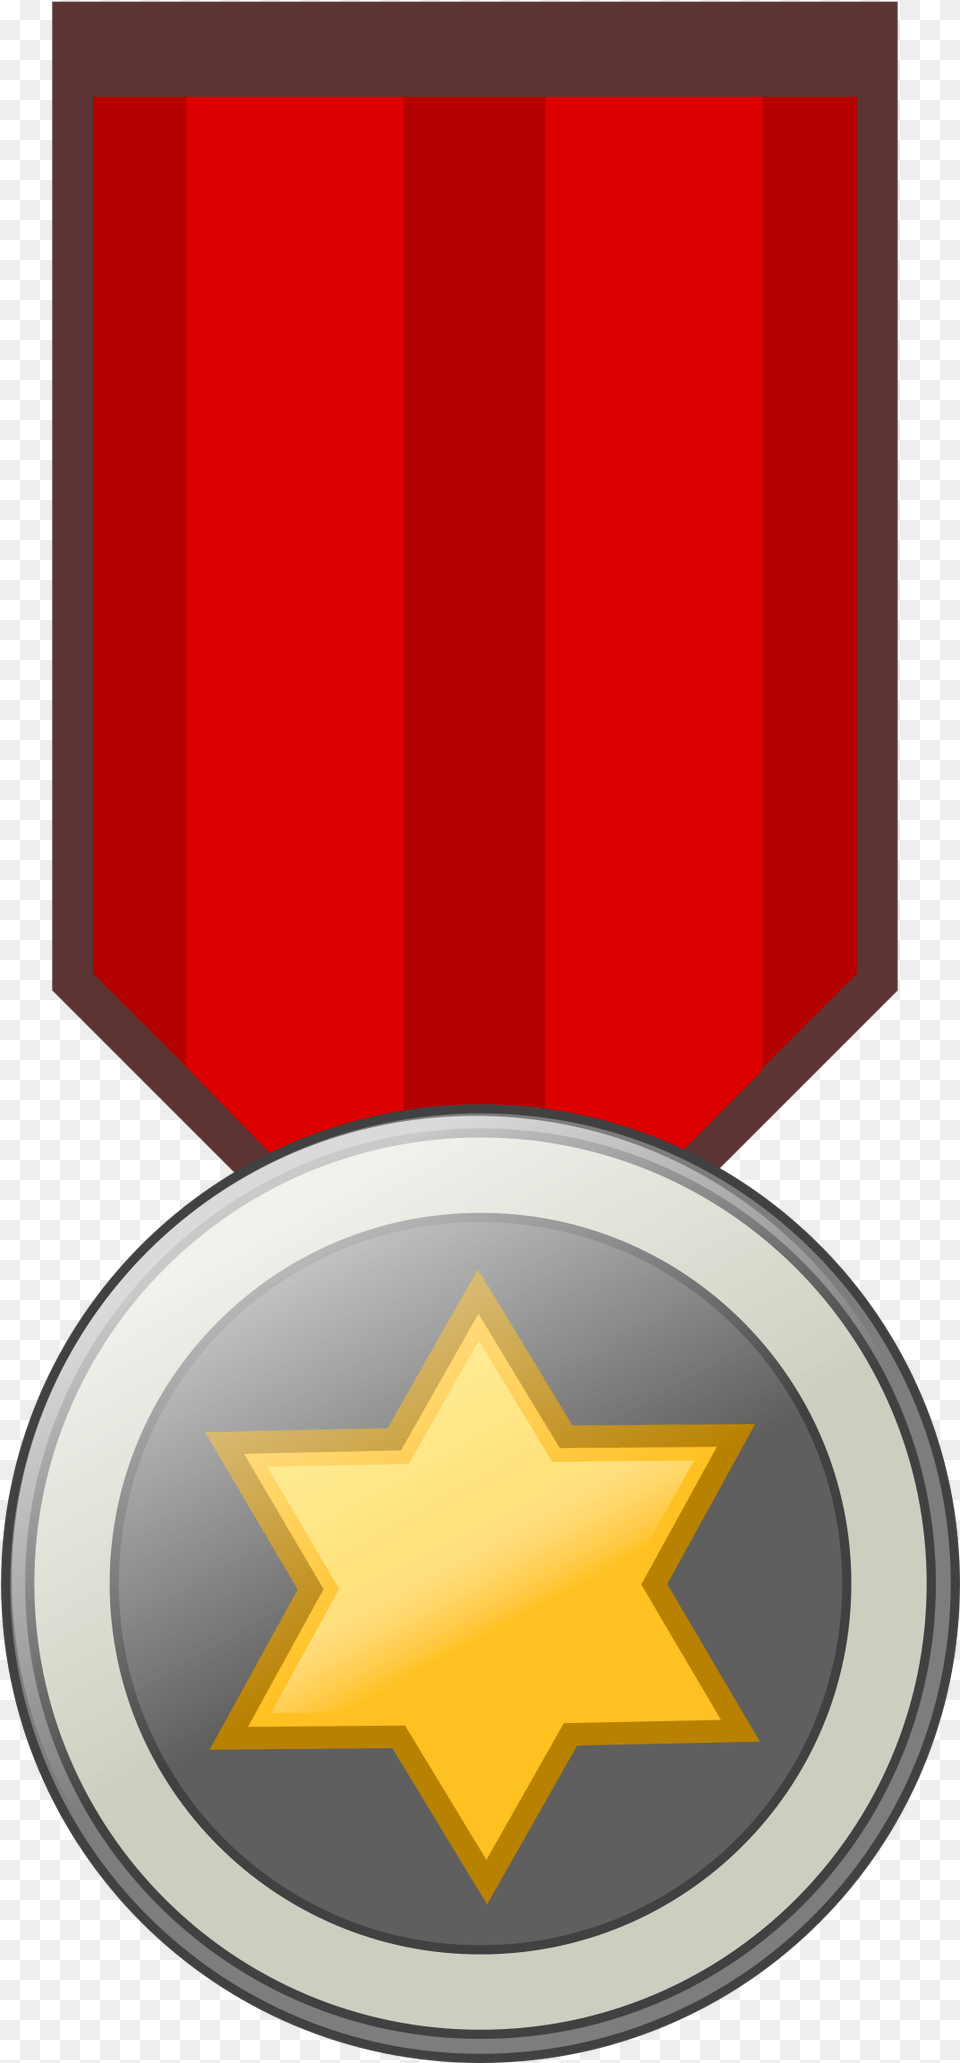 This Icons Design Of Star Award Medal Remix, Armor, Symbol, Shield Free Transparent Png